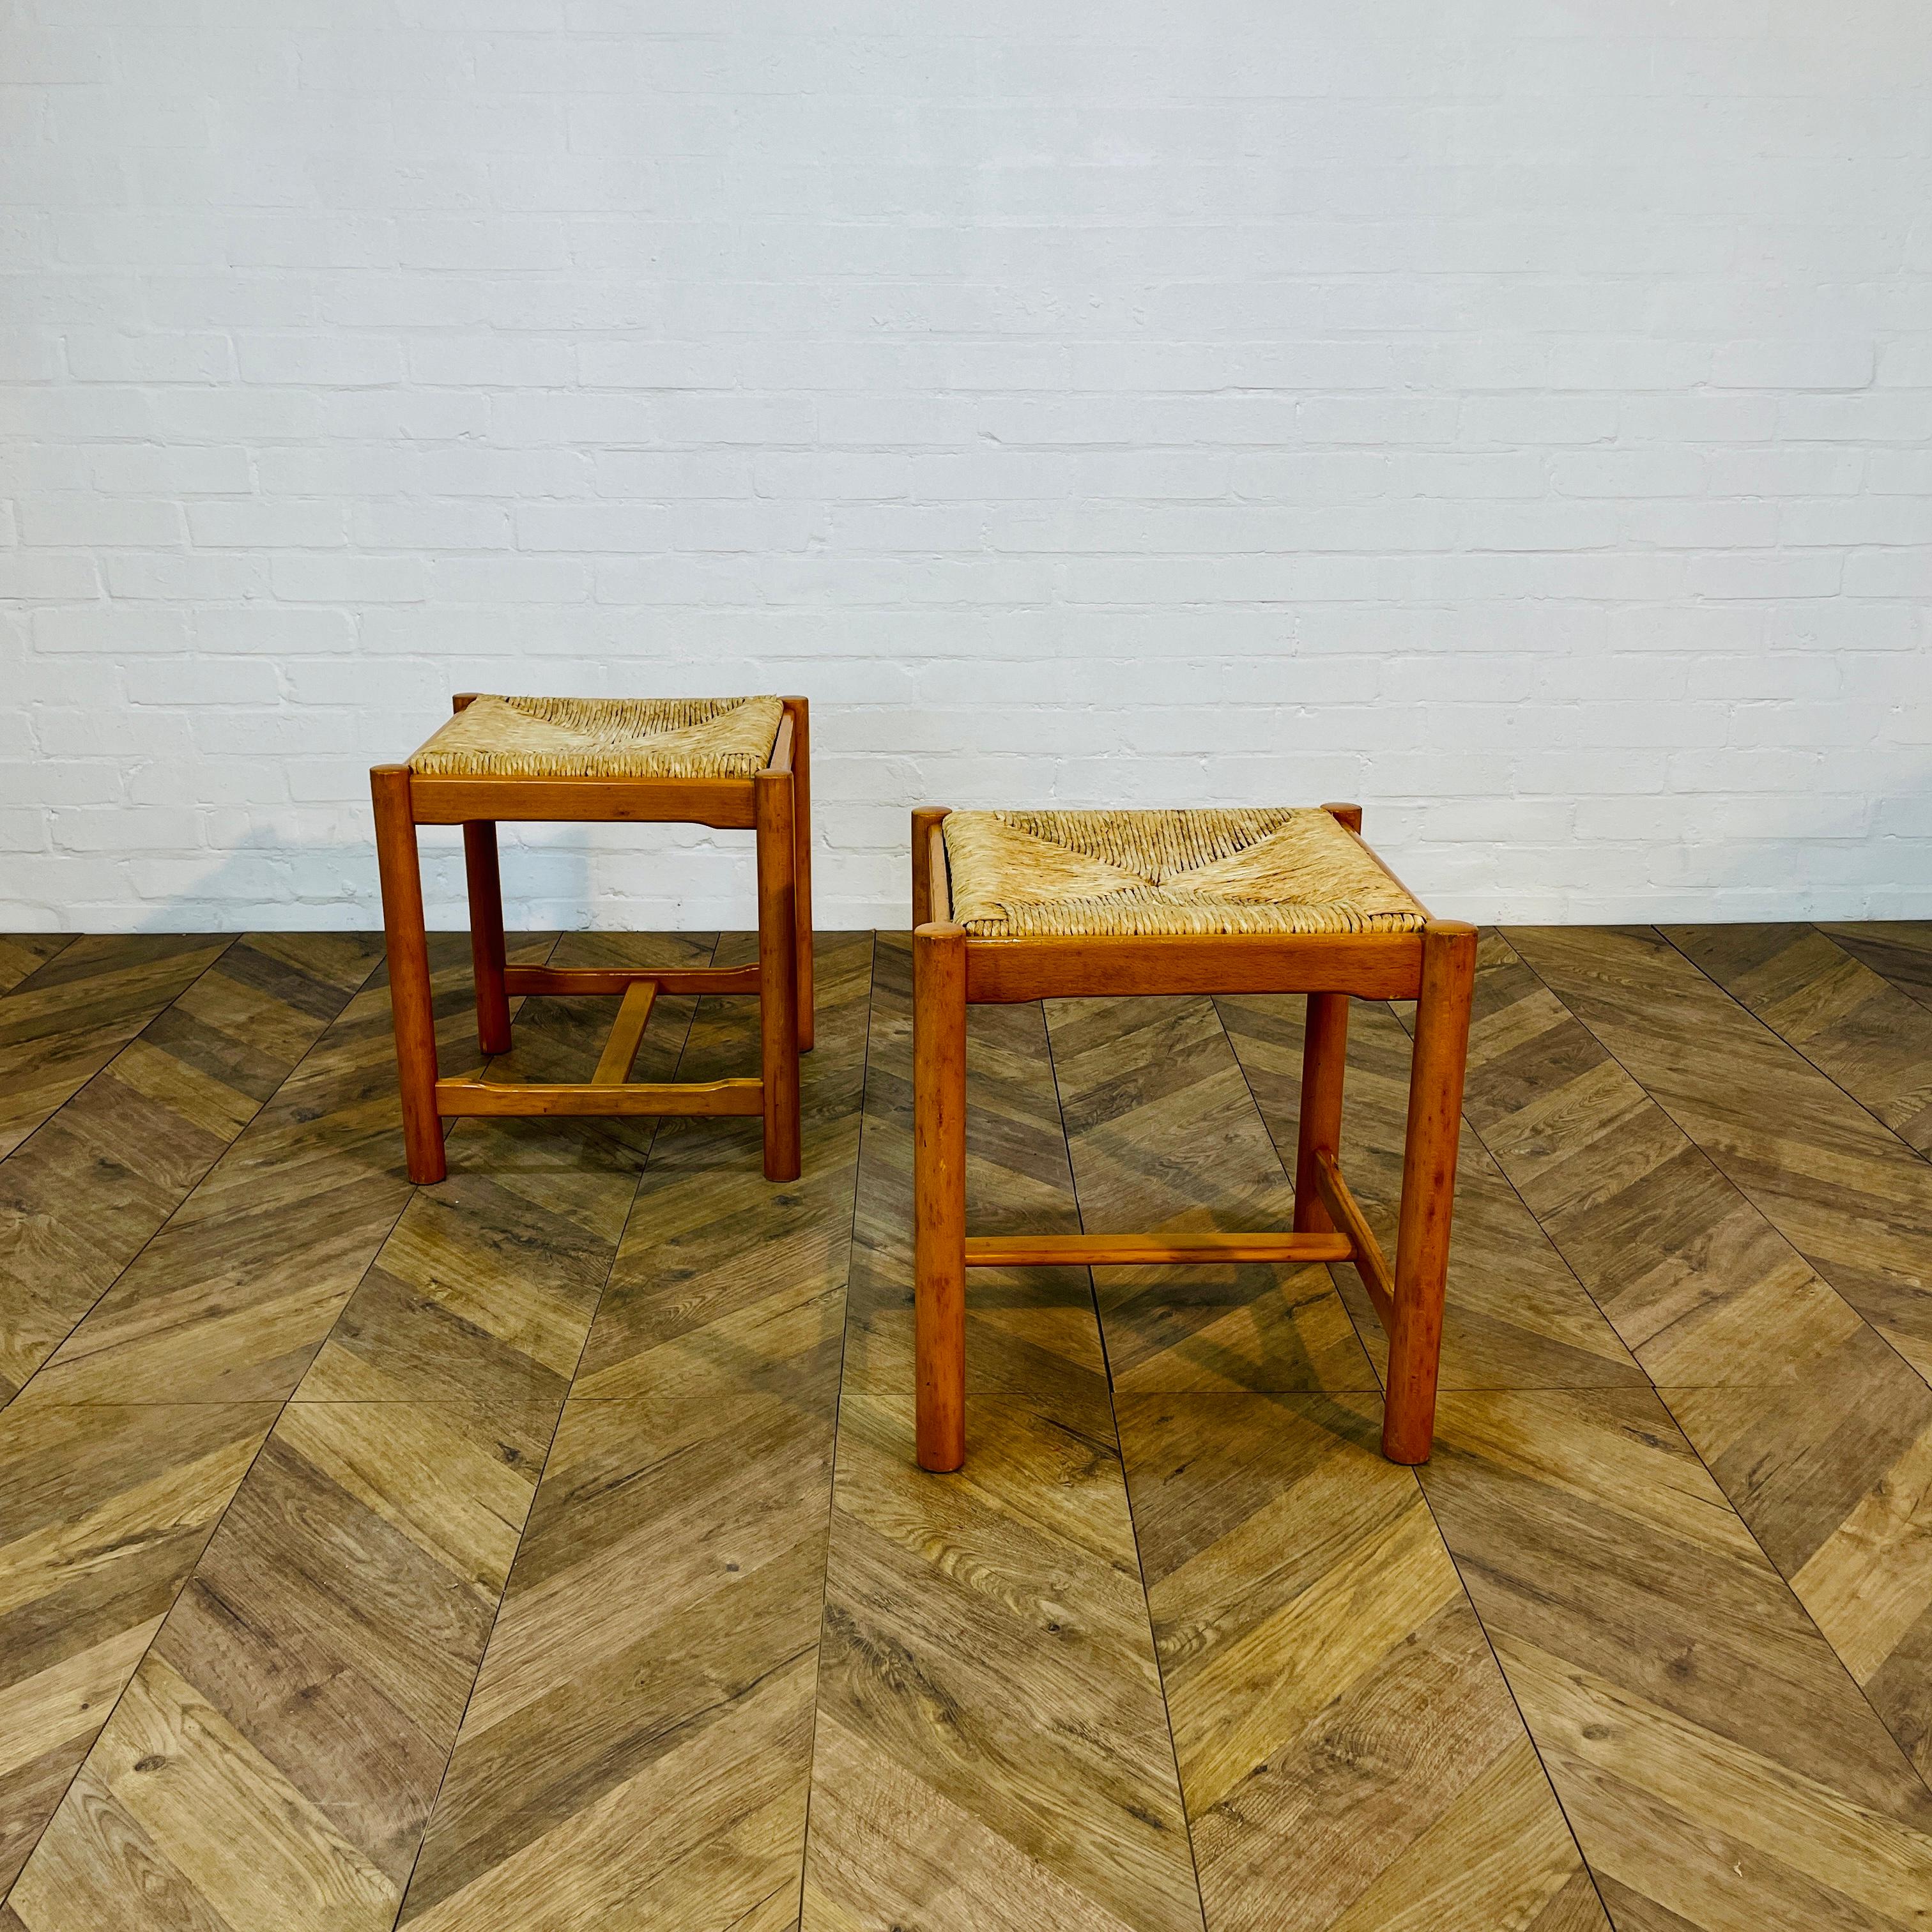 Set of 2, Italian Low Stools Attributed to Designer Vico Magistretti, circa 1970s.

The stools are made from beech with rush seats.

Structurally the stools are in very good condition, with no issues other than general wear and scuffs in-keeping